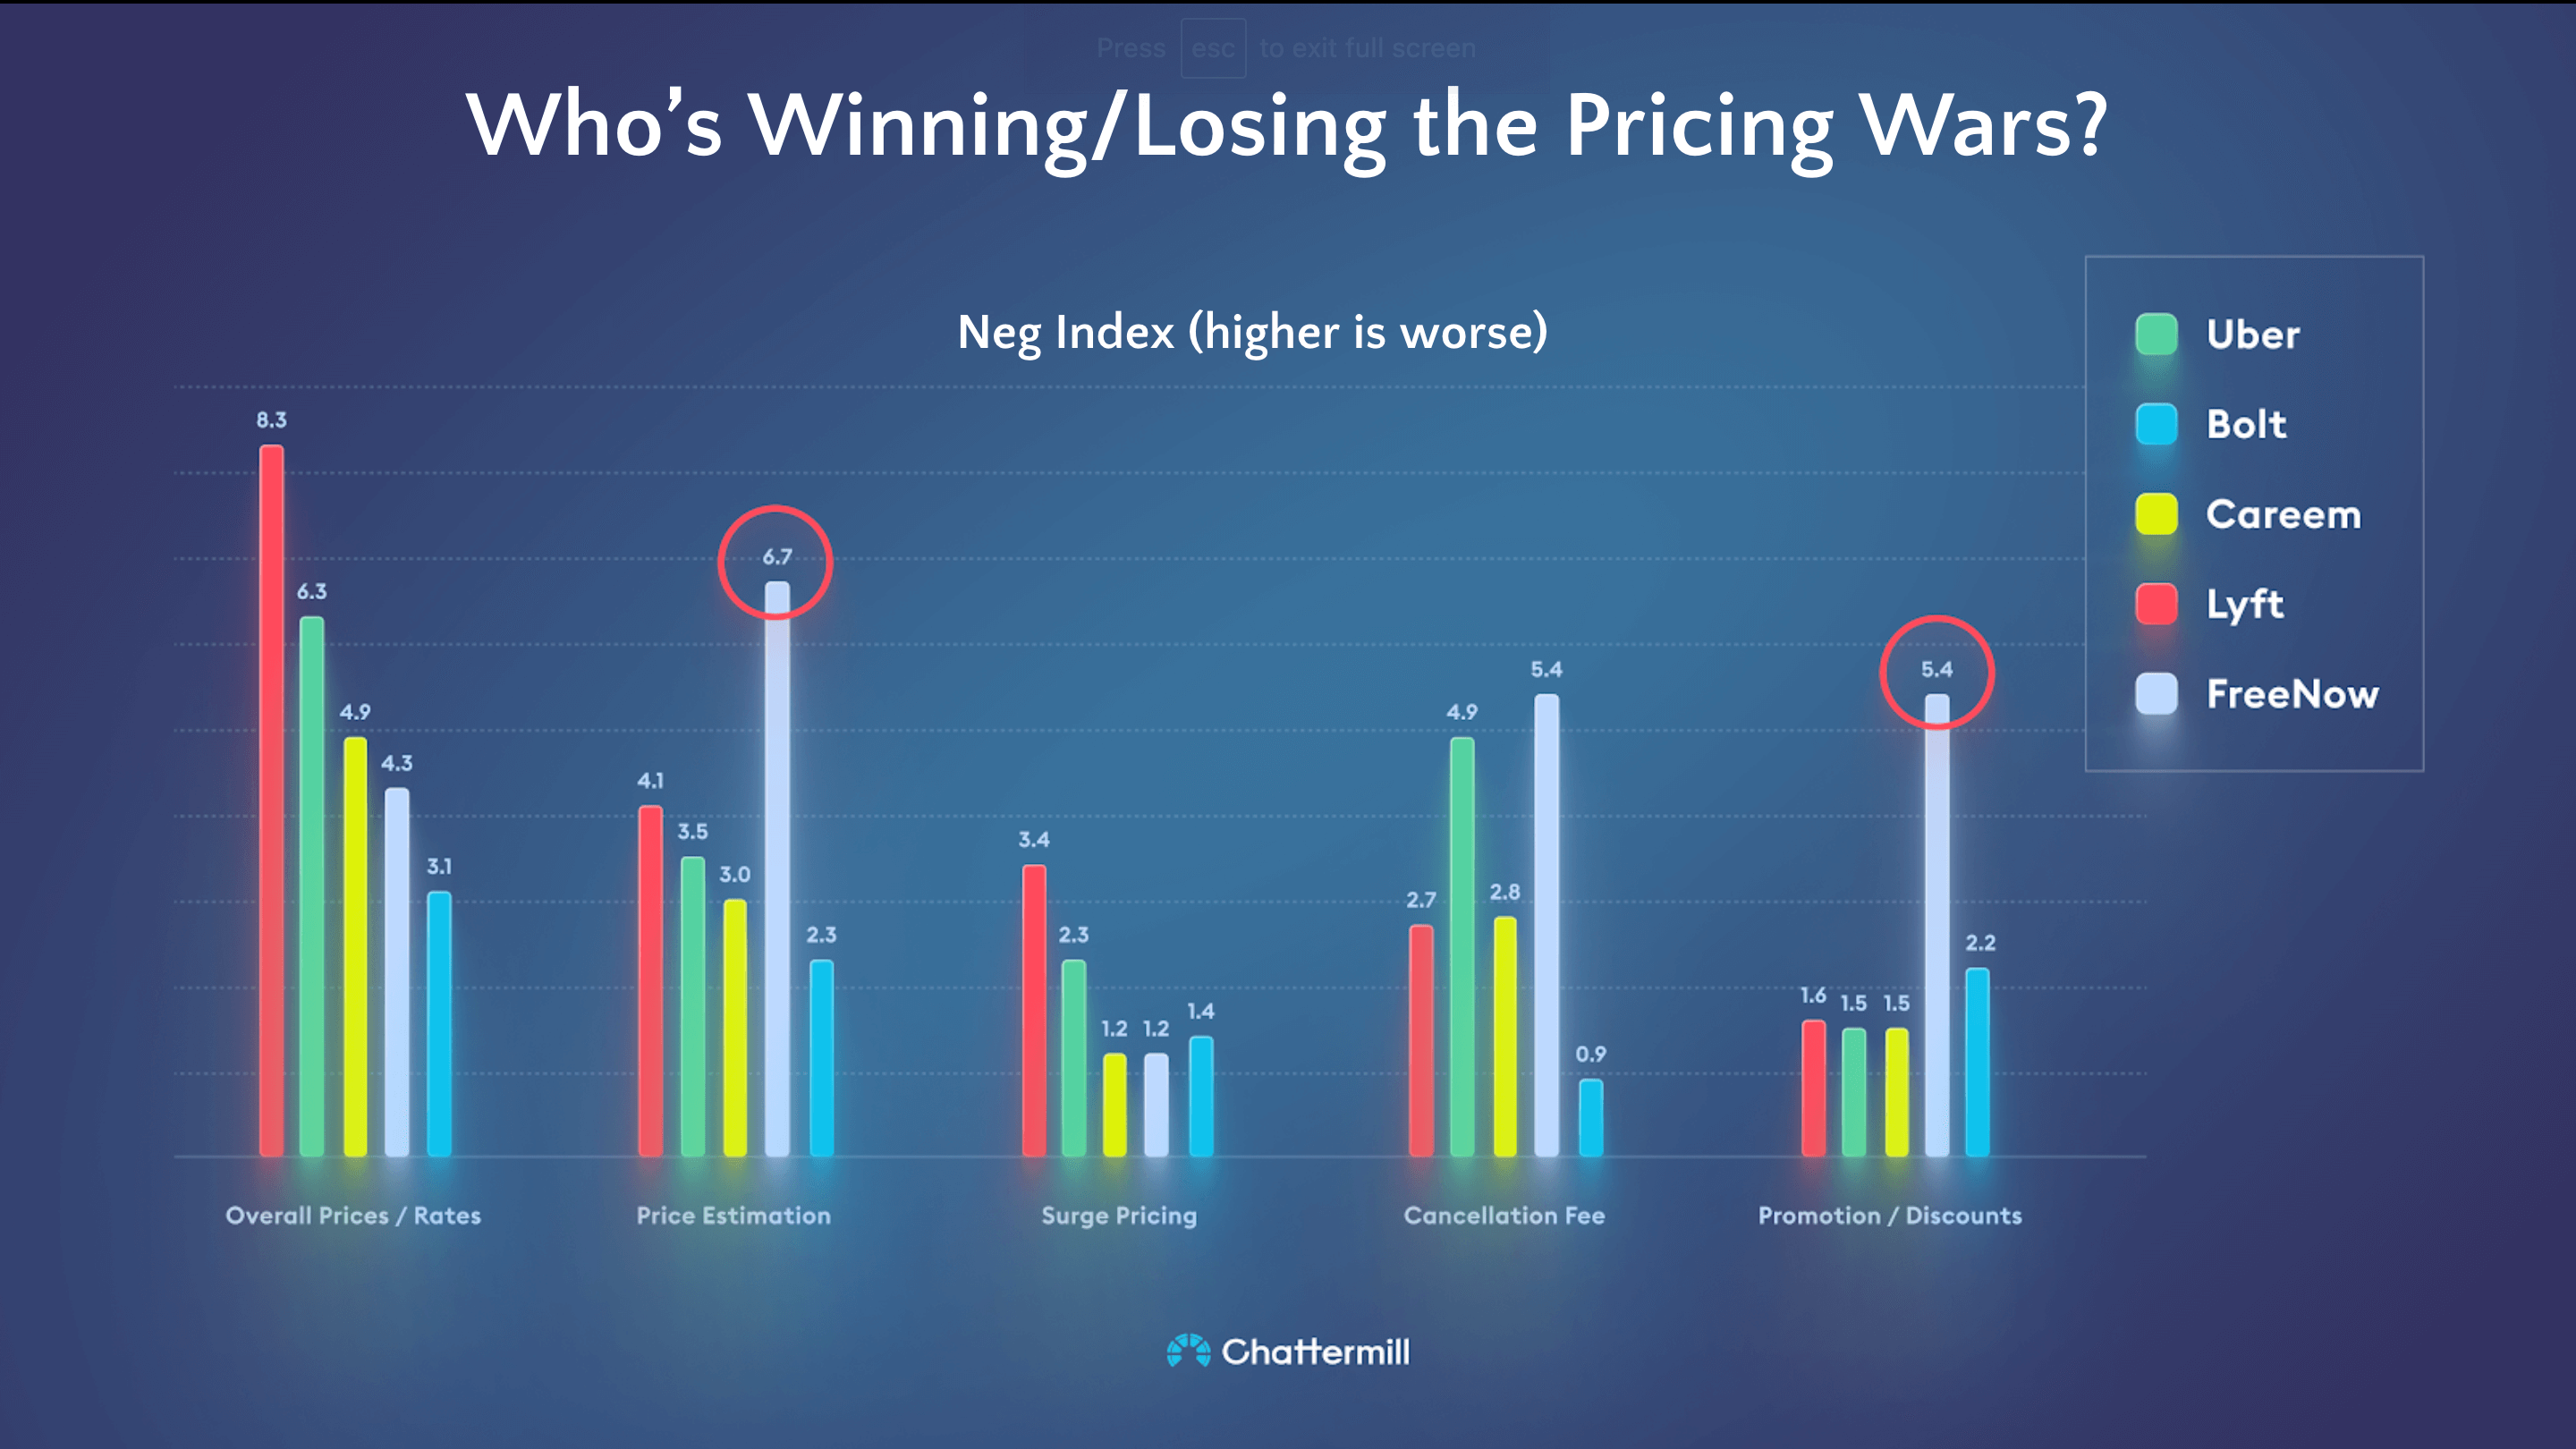 Ridesharing: who's winning and losing the pricing wars?